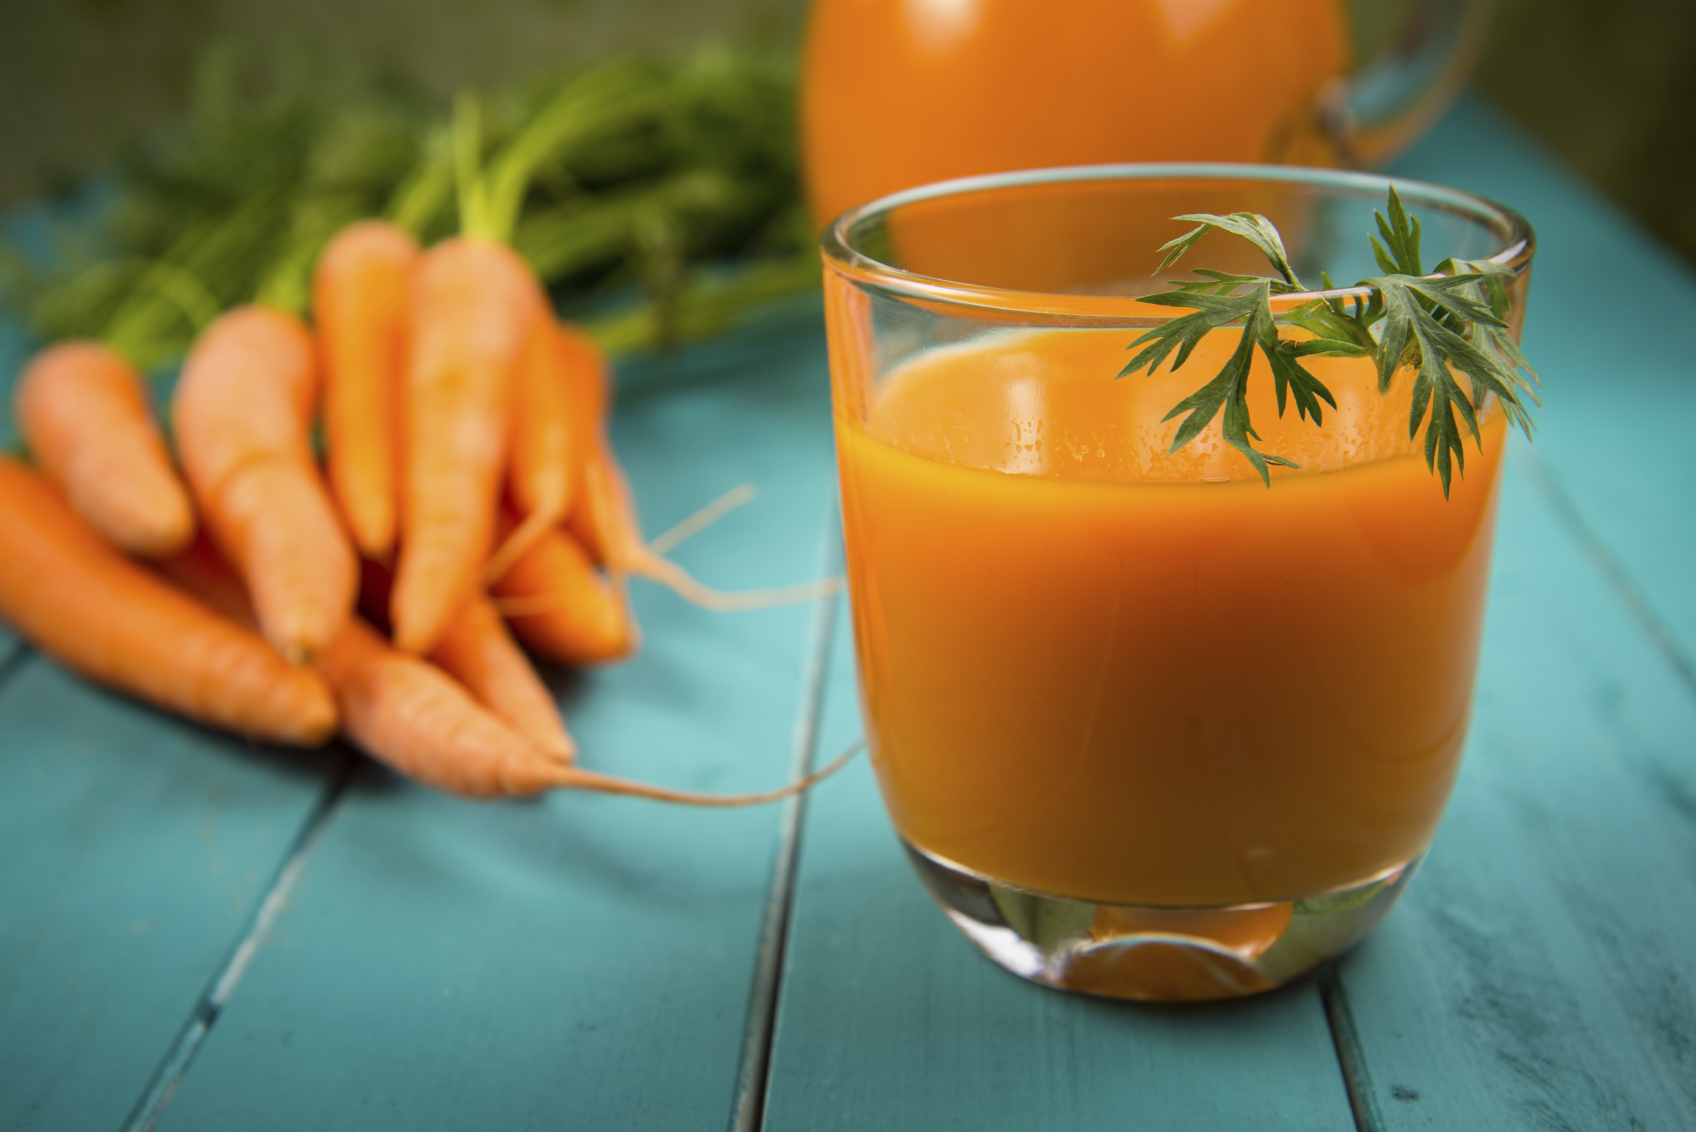 Make Good Carrot Juice Step By Step In Ambon City